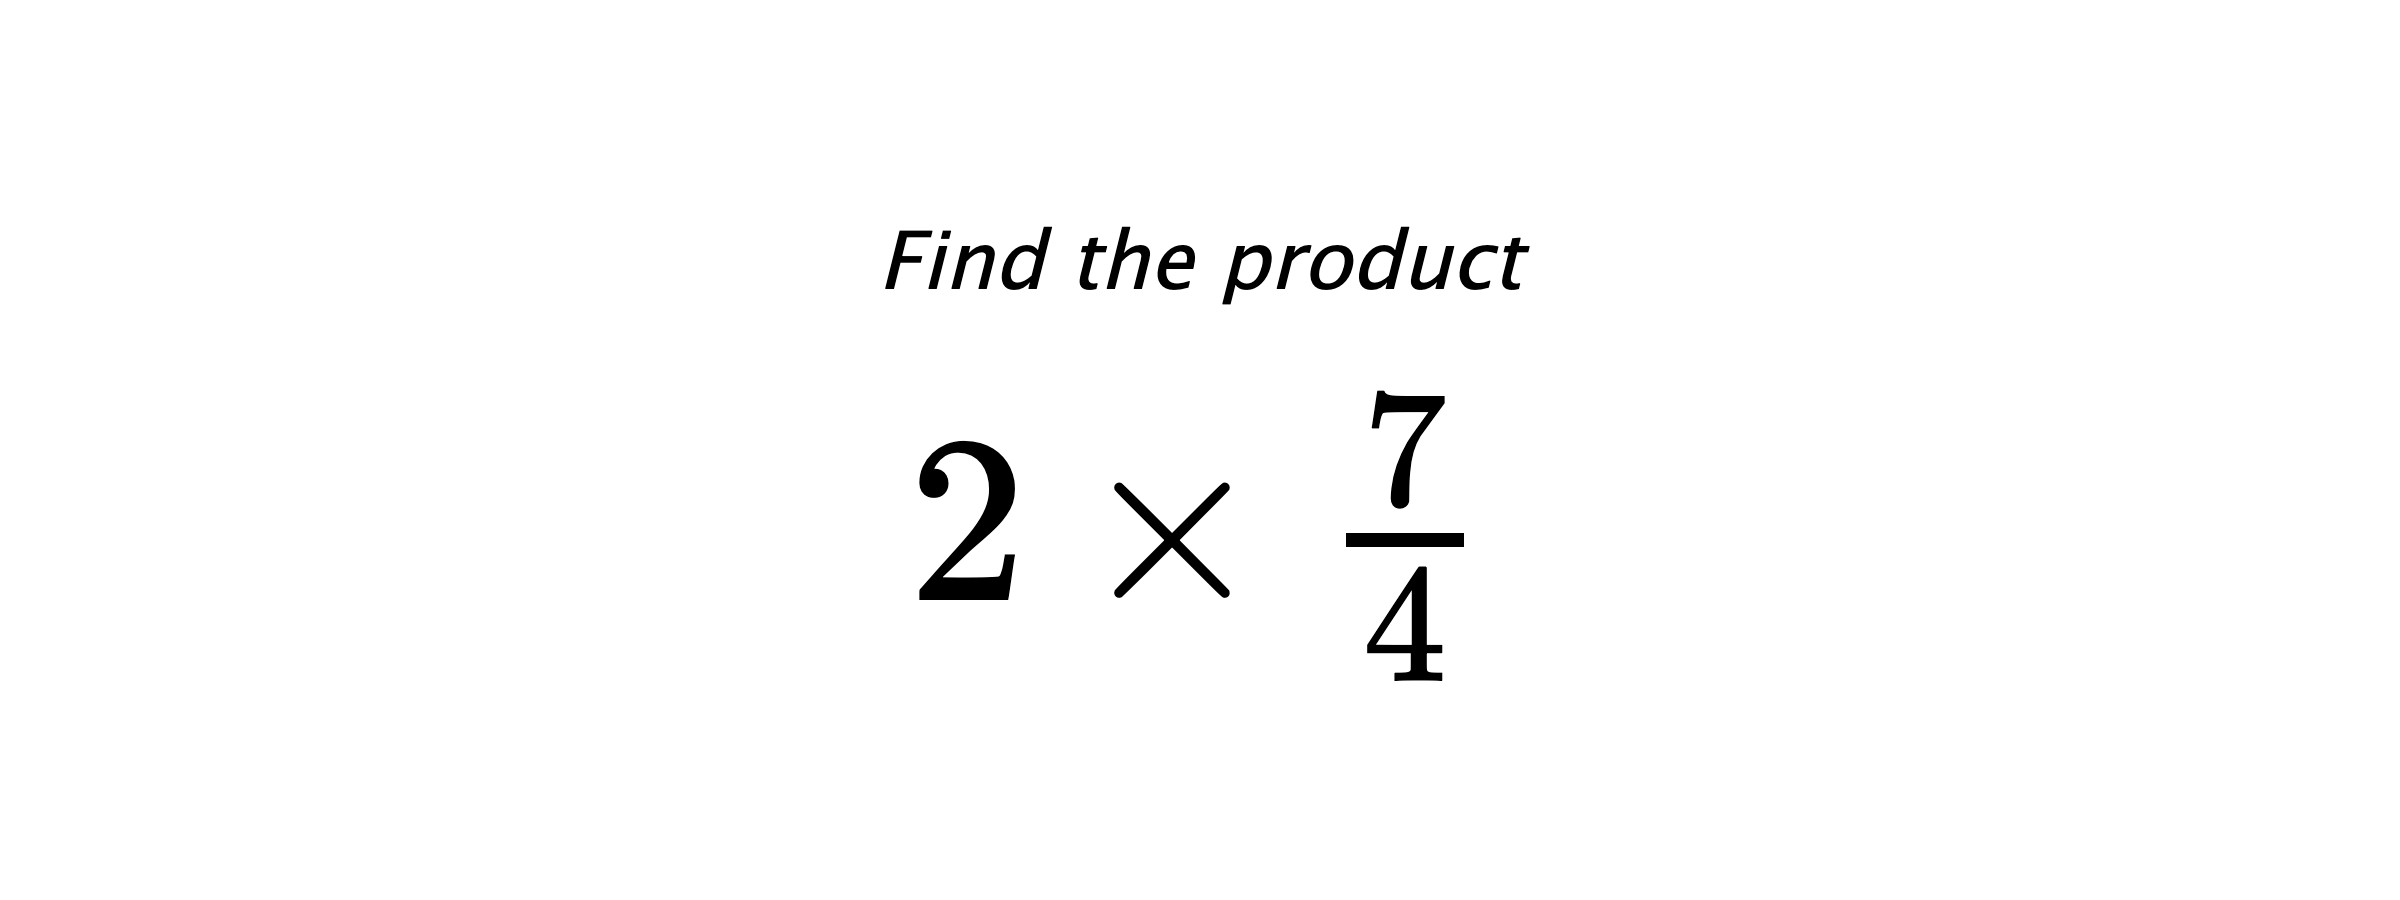 Find the product $ 2 \times \frac{7}{4} $